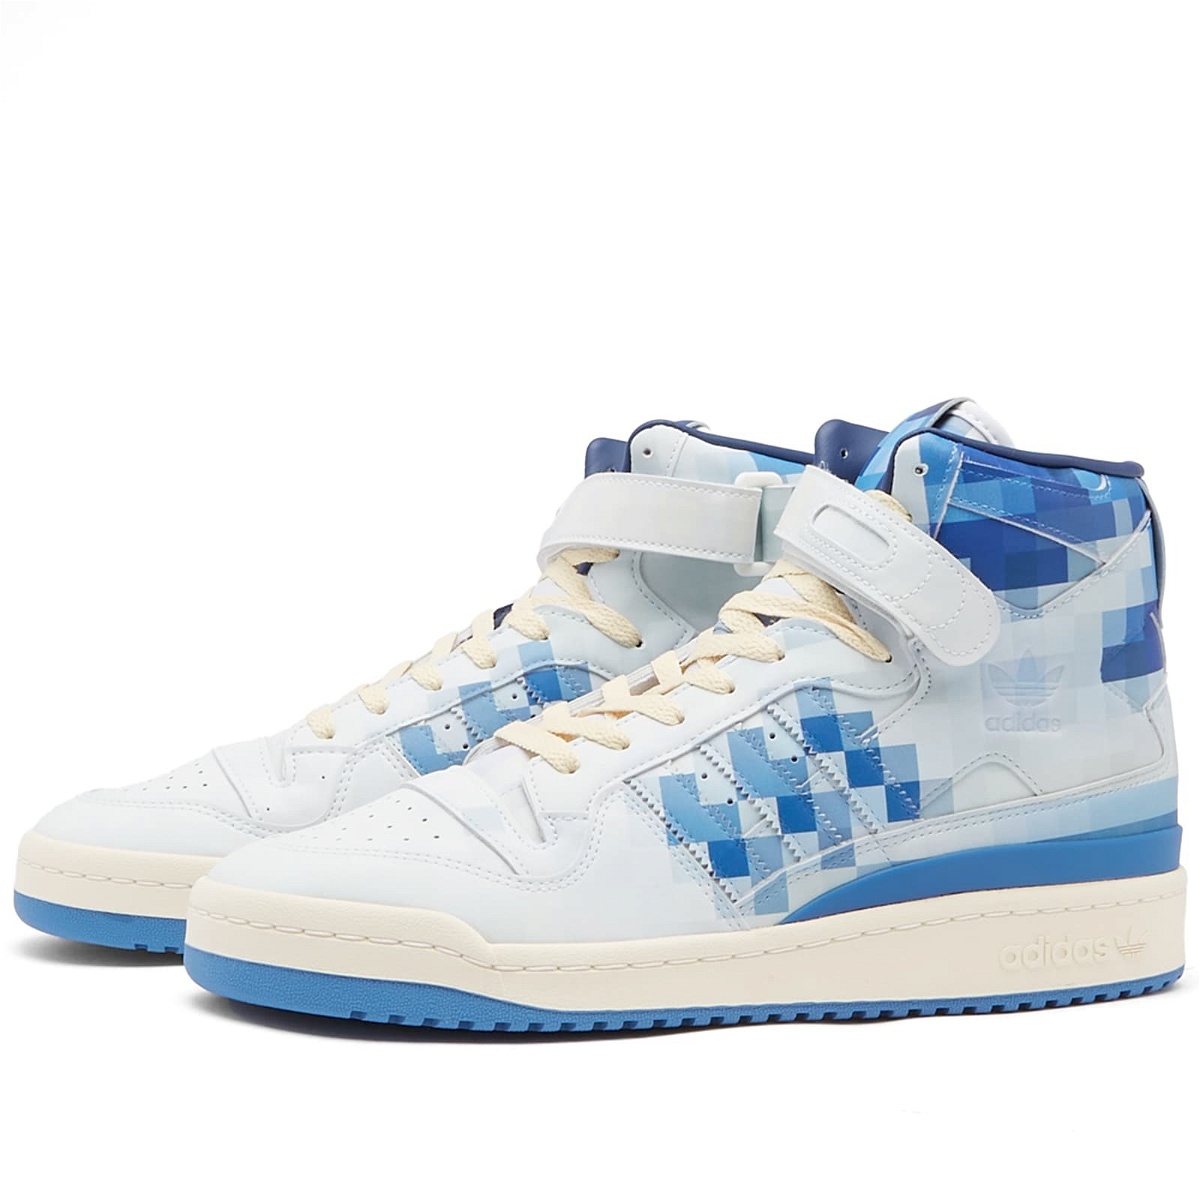 Photo: Adidas Men's Forum 84 Hi-Top Closer Look Sneakers in Off White/Trace Royal